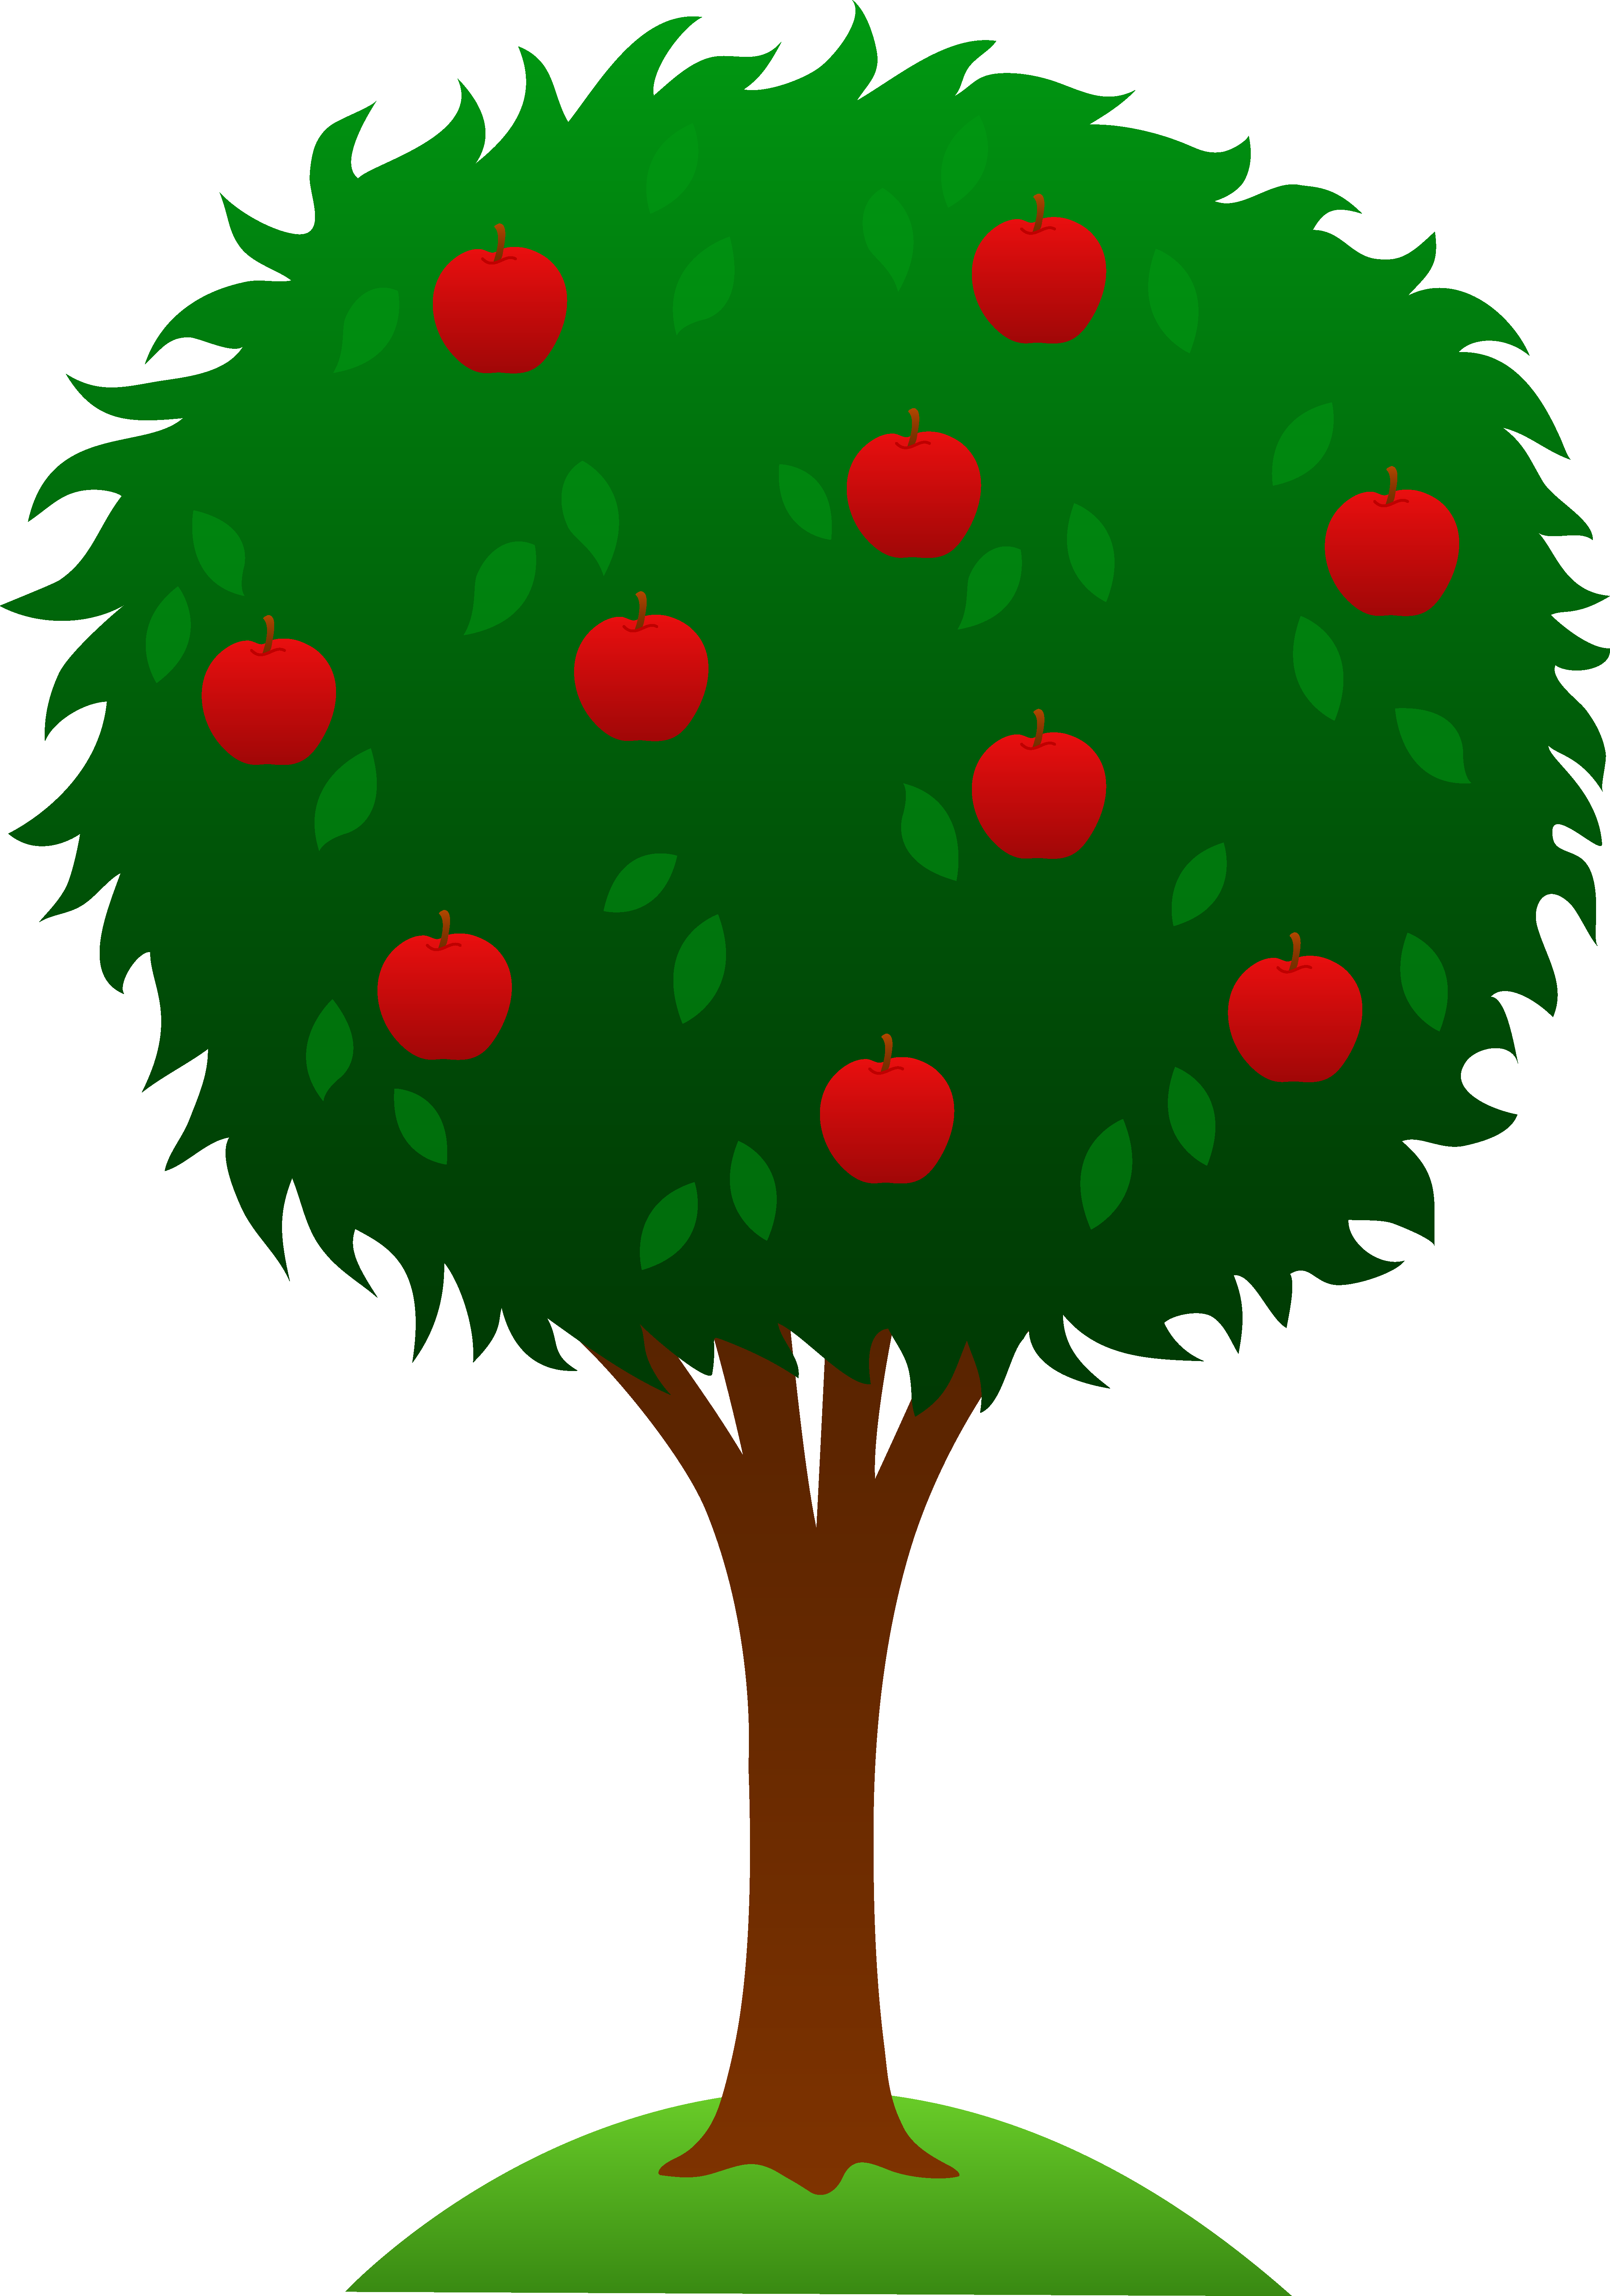 Orange Tree Drawing - Free Clipart Images